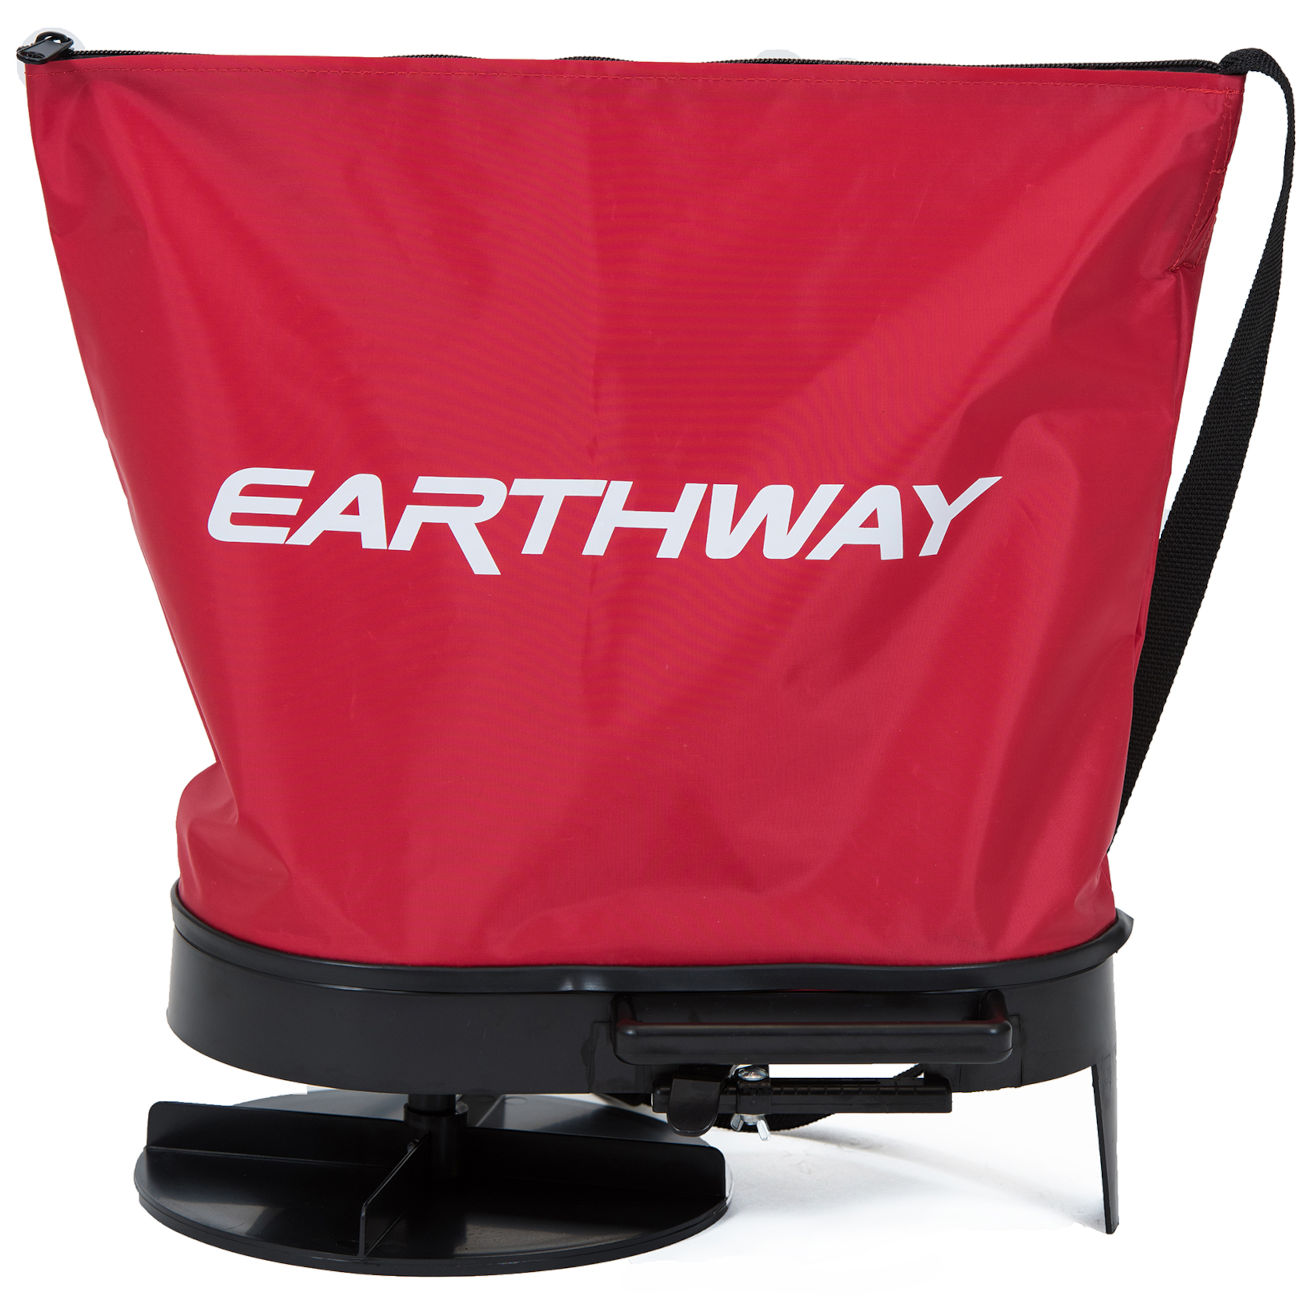 Whitetail Institute Earthway Seed Spreader